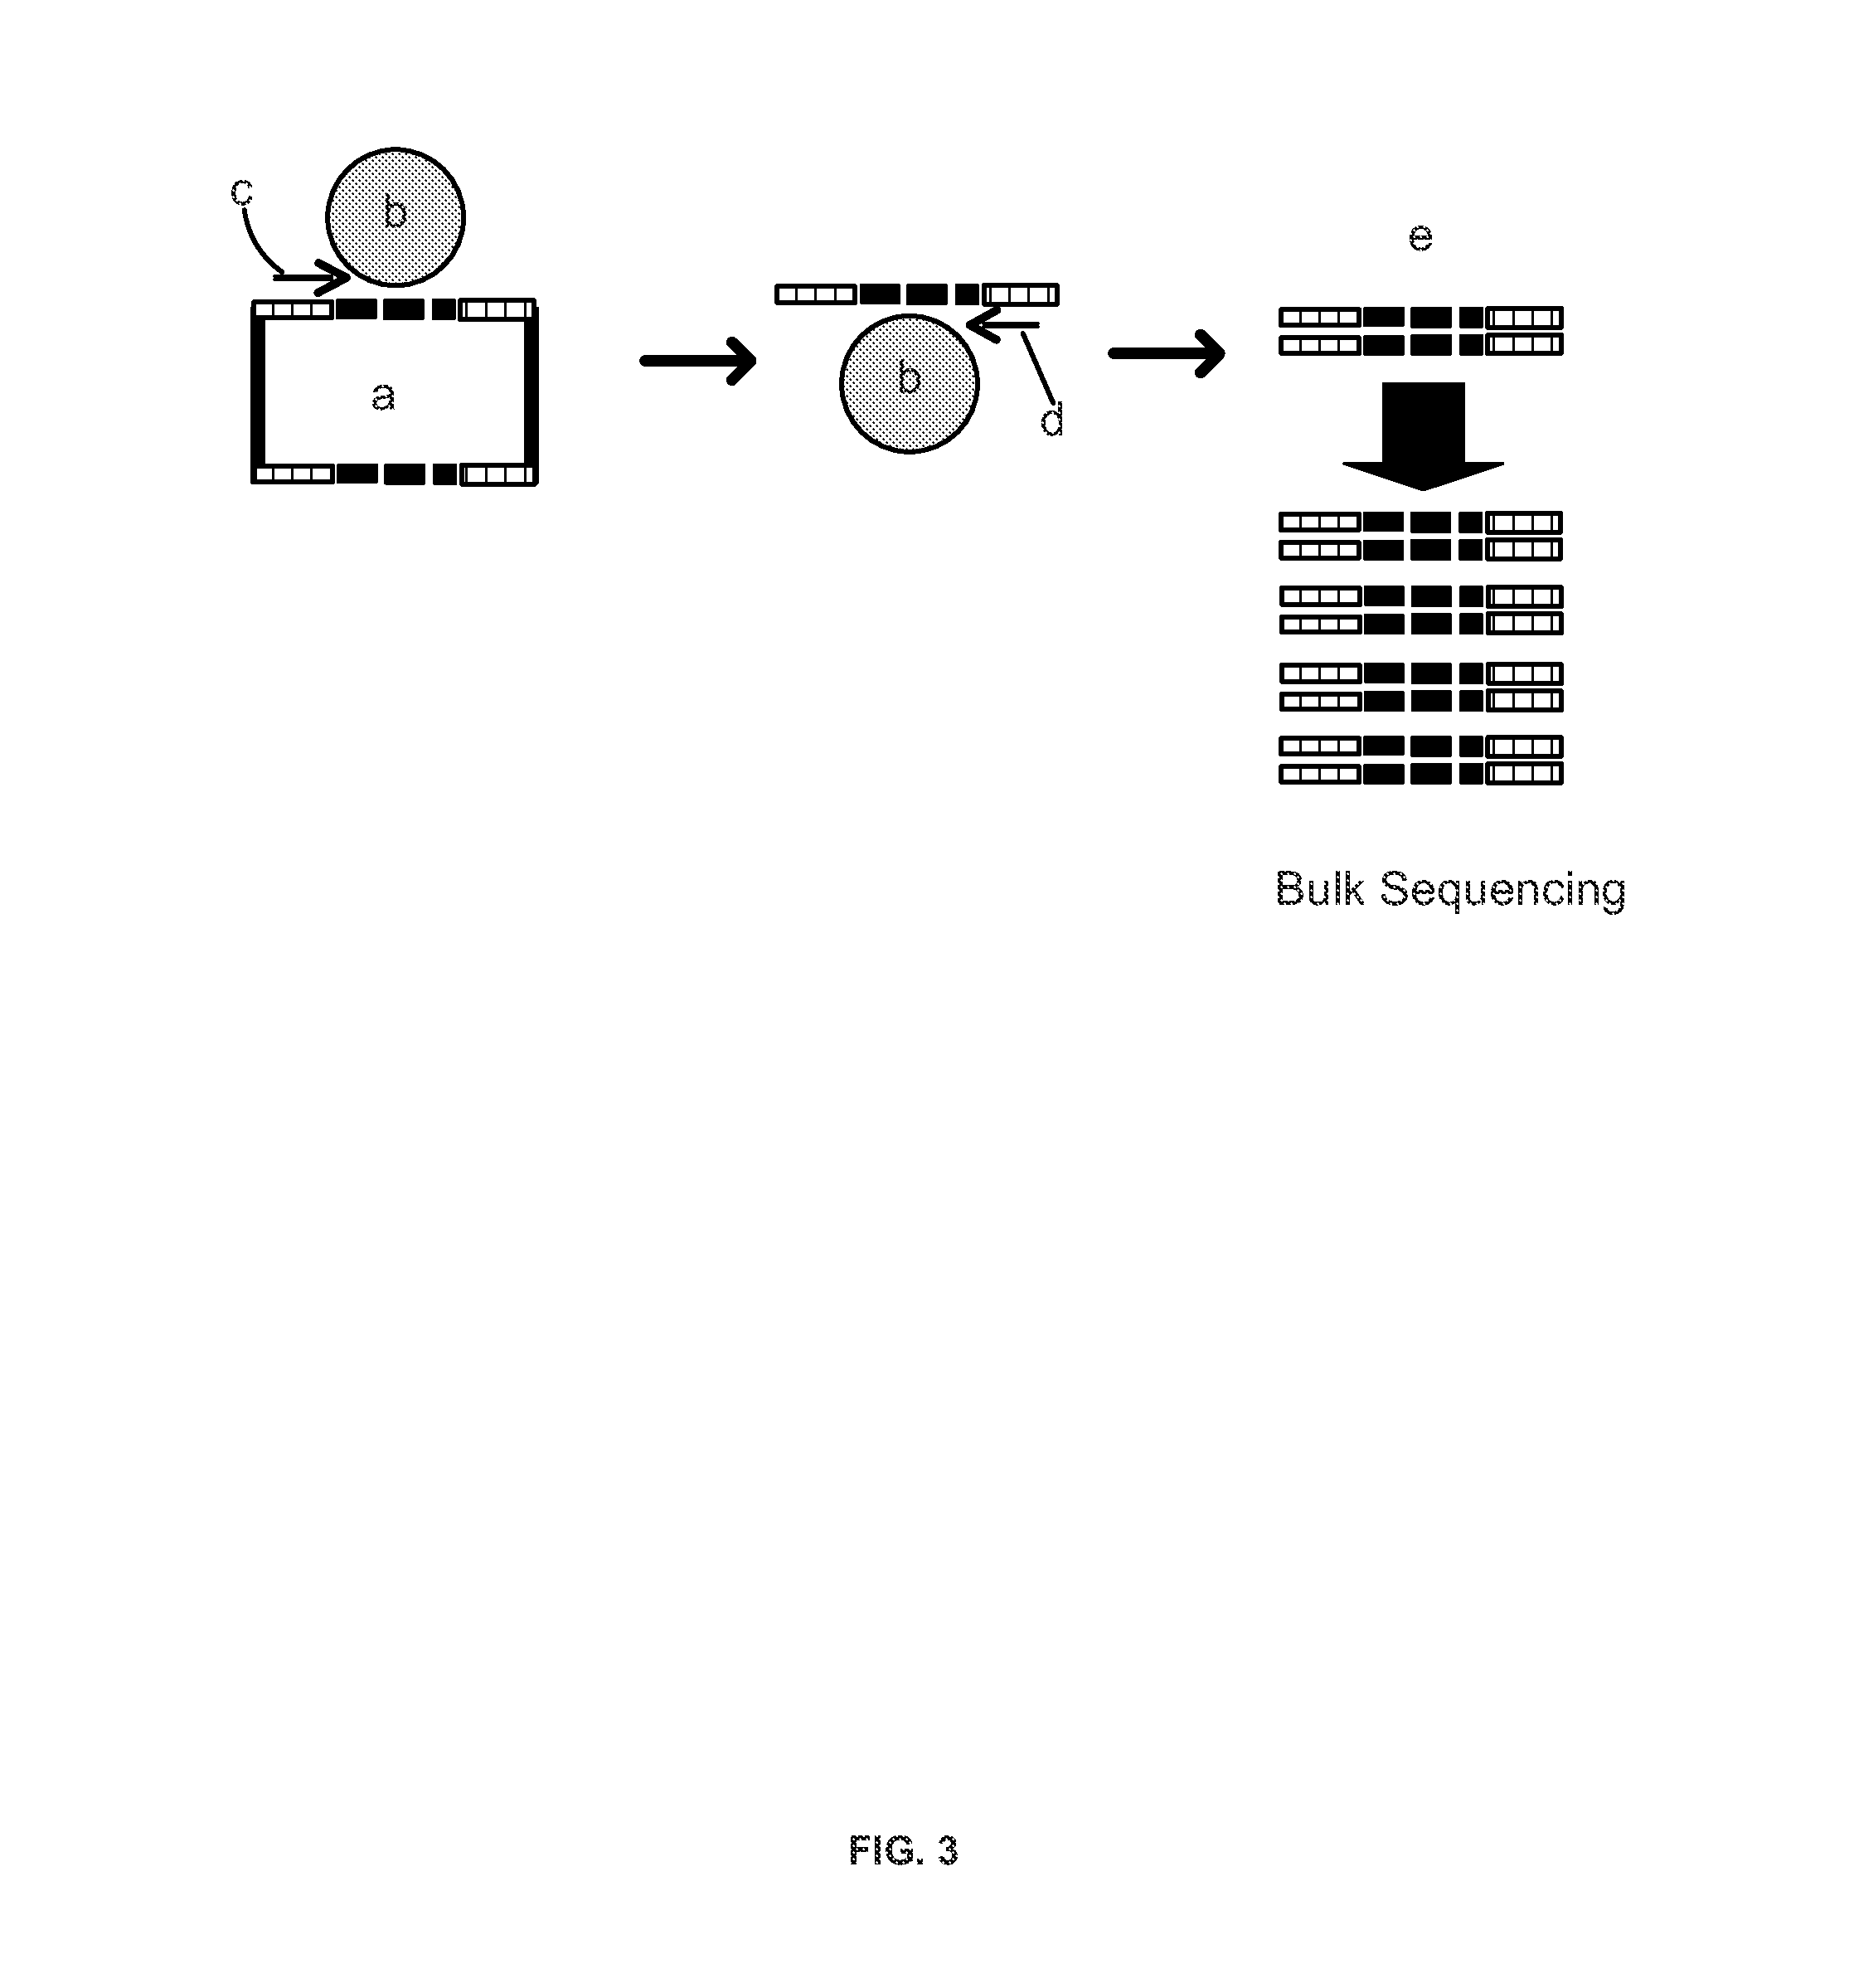 System and Methods for Massively Parallel Analysis of Nucleic Acids in Single Cells